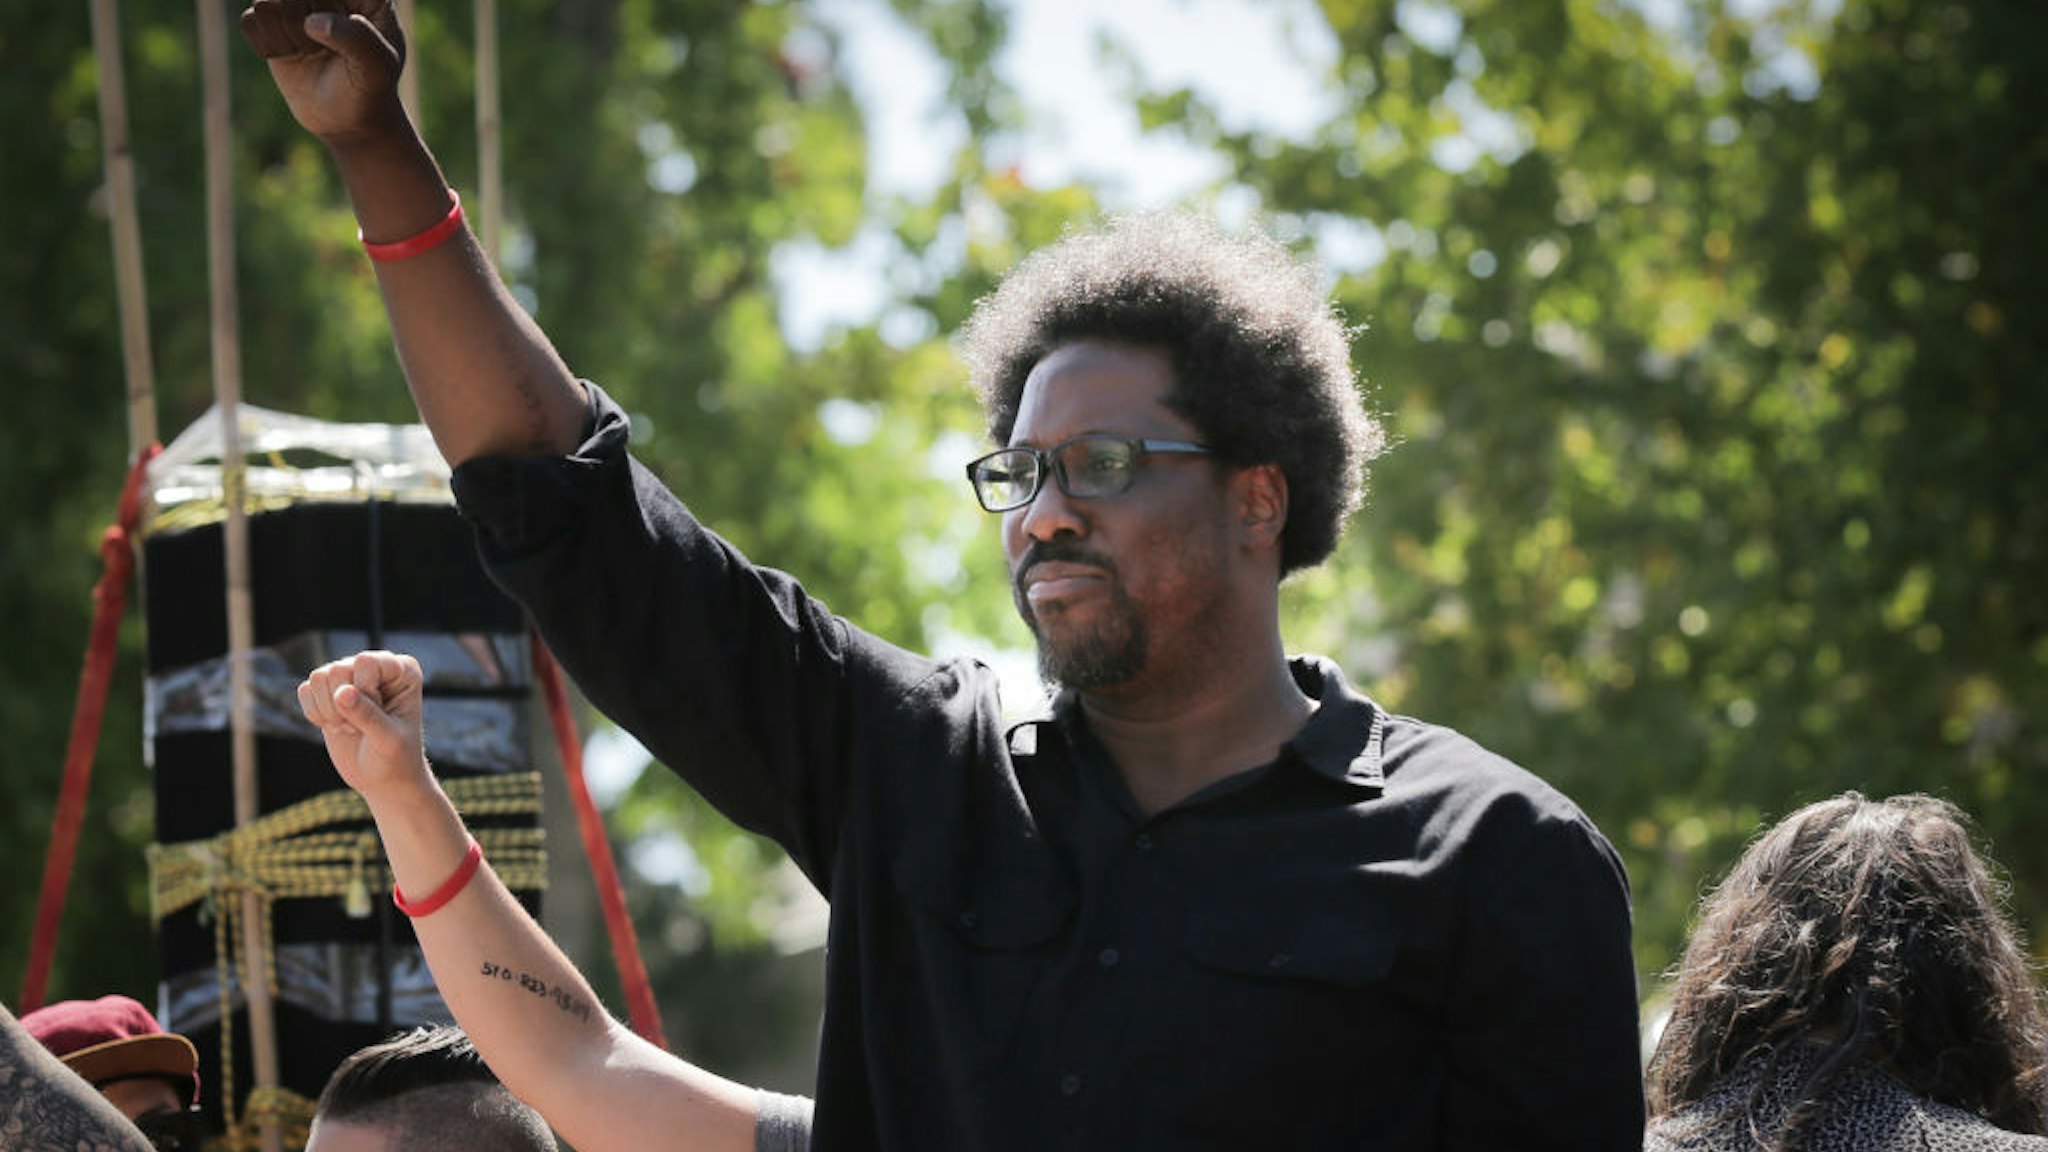 BERKELEY, CA - AUGUST 27: Comedian W. Kamau Bell raises his fist from a truck as people begin to march from MLK Jr. Park on August 27, 2017 in Berkeley, California. (Photo by Elijah Nouvelage/Getty Images)